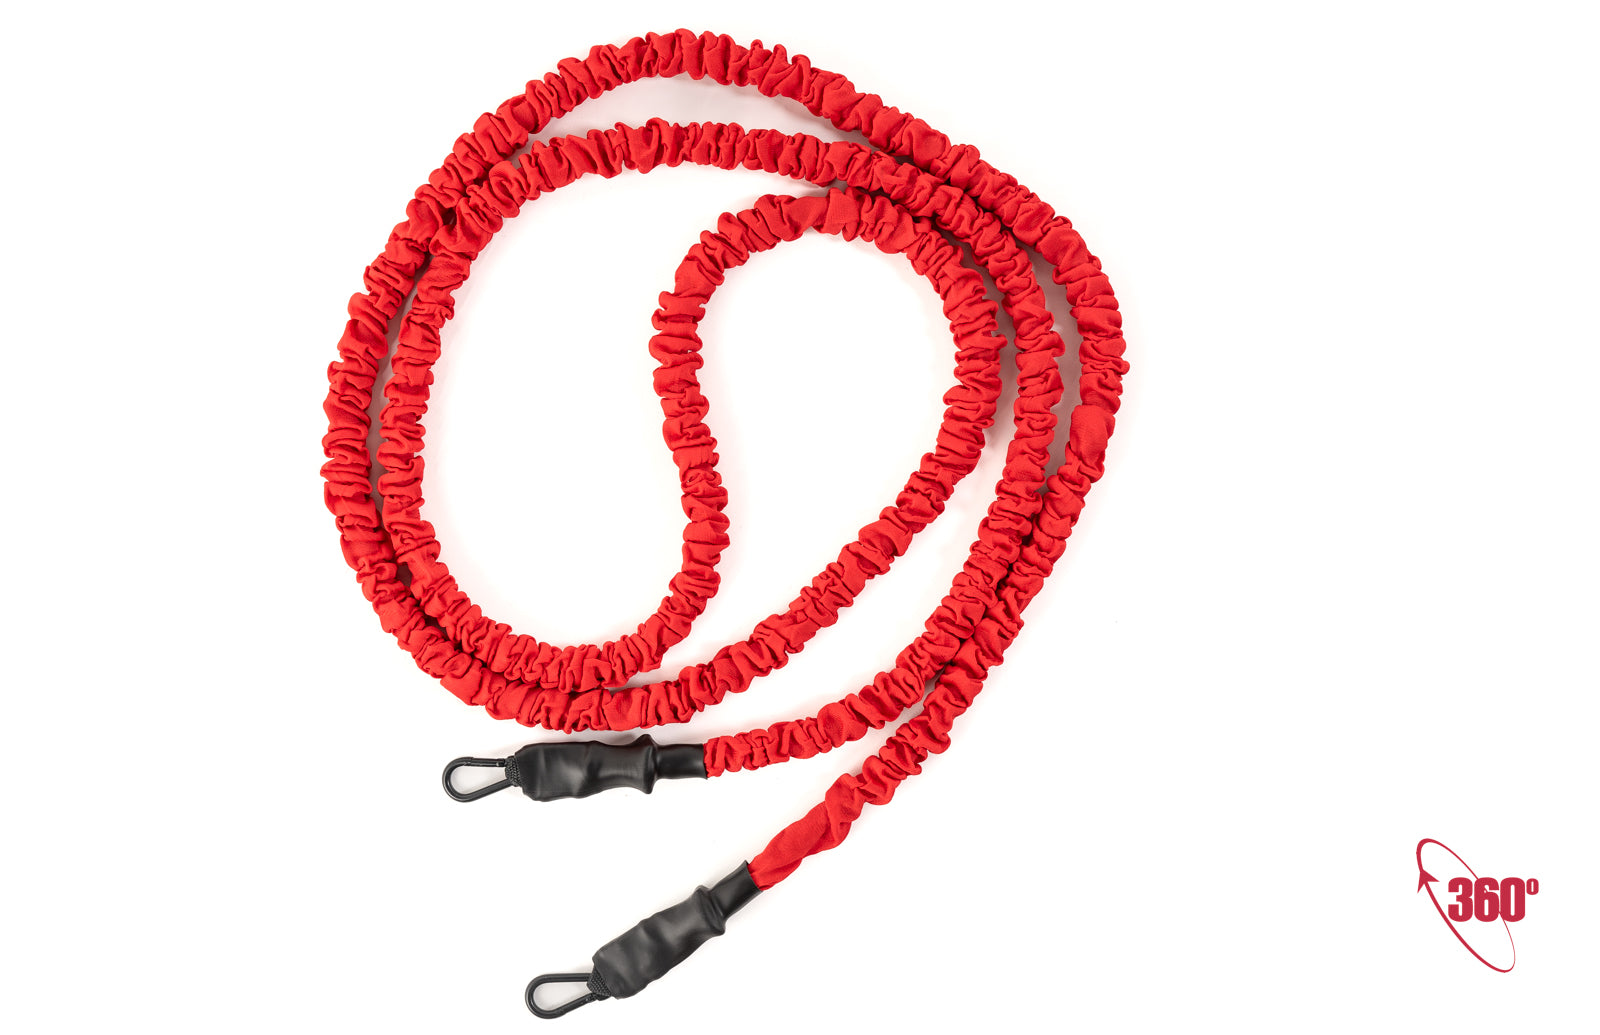 The 360 Sport Cord Combo